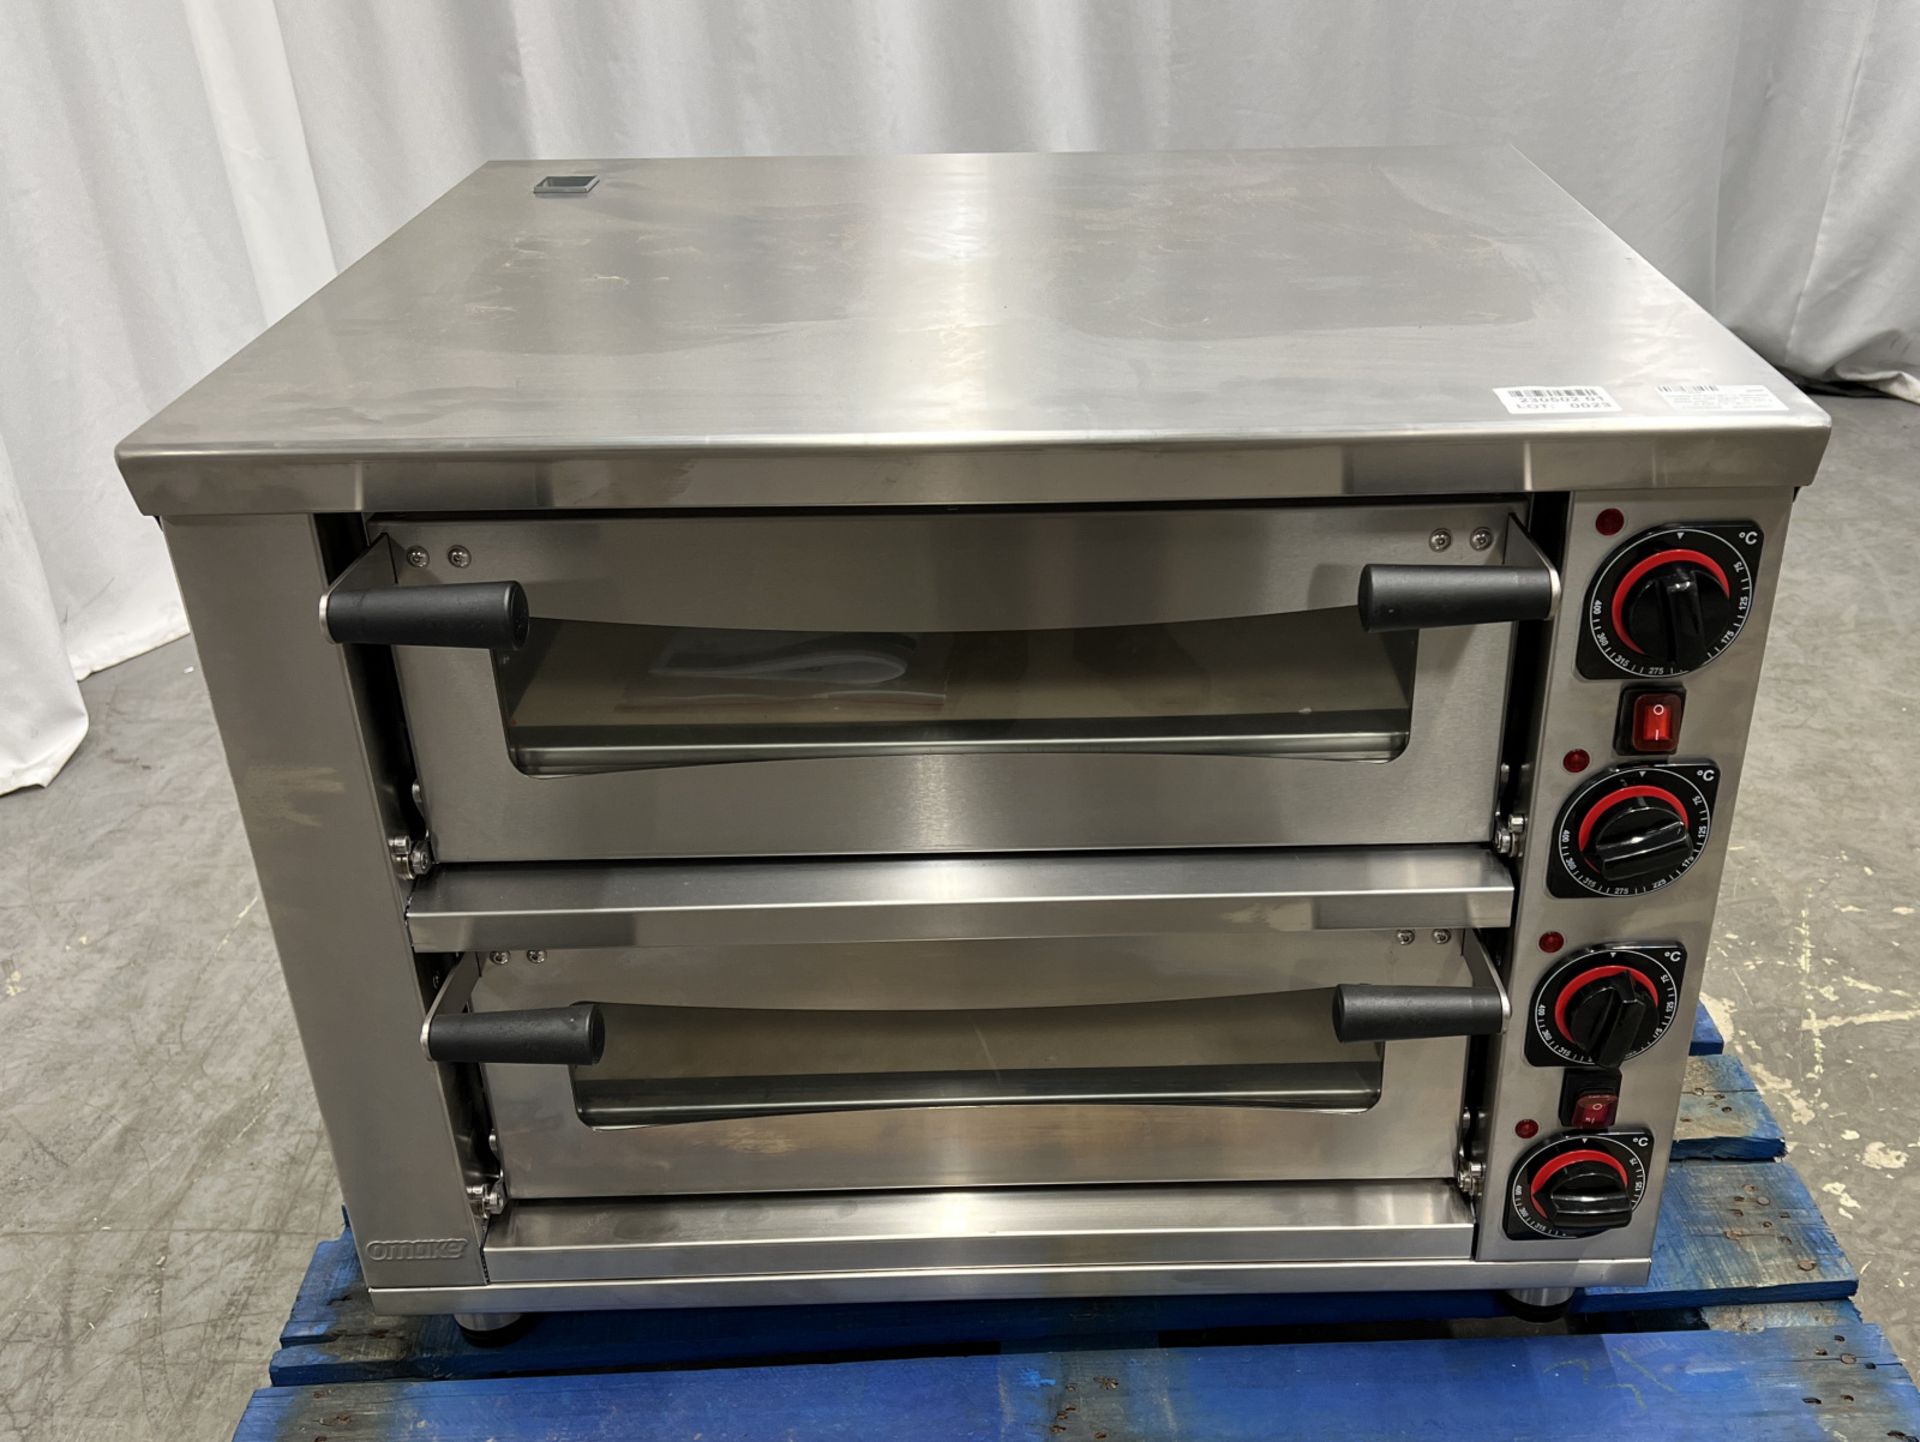 Omake FPZ01/ET11 stainless steel double drawer electric pizza oven - 400V - W 880 x D 820 x H 790mm